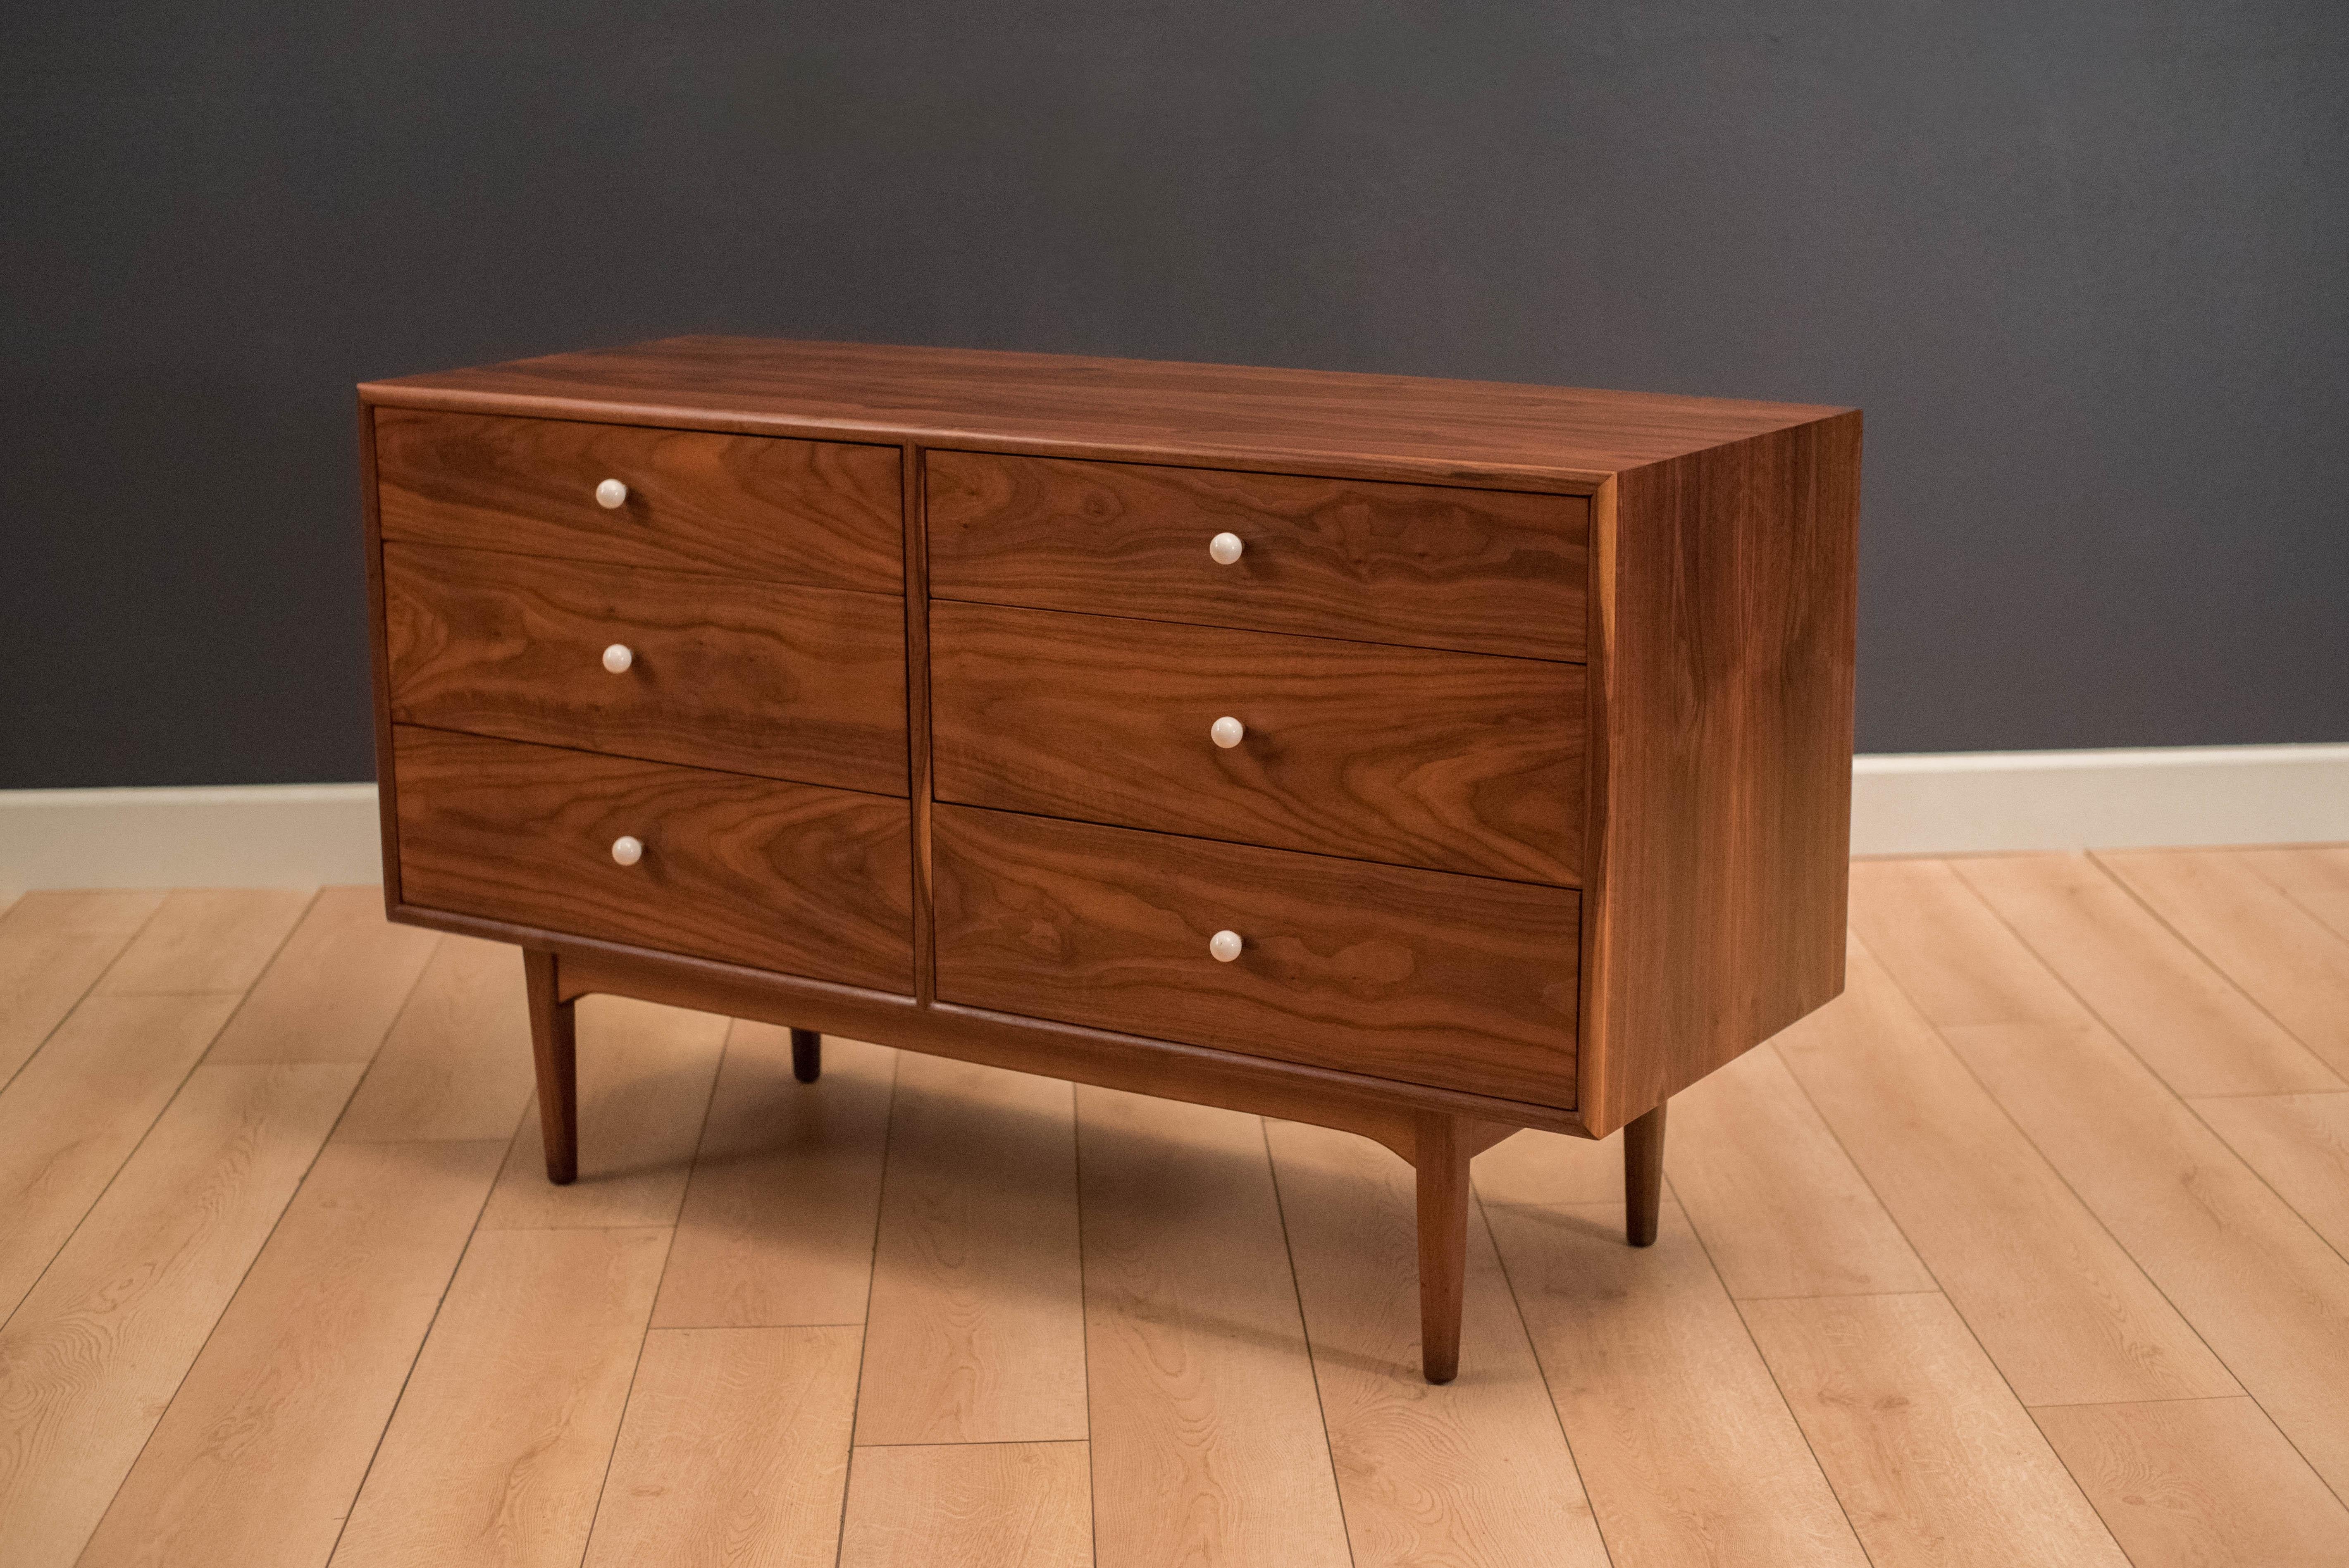 Mid Century Drexel Declaration low dresser by Kipp Stewart & Stewart MacDougall. This piece features book matched black walnut grains and includes their signature porcelain knobs. Includes plenty of storage with six dovetailed drawers.
 